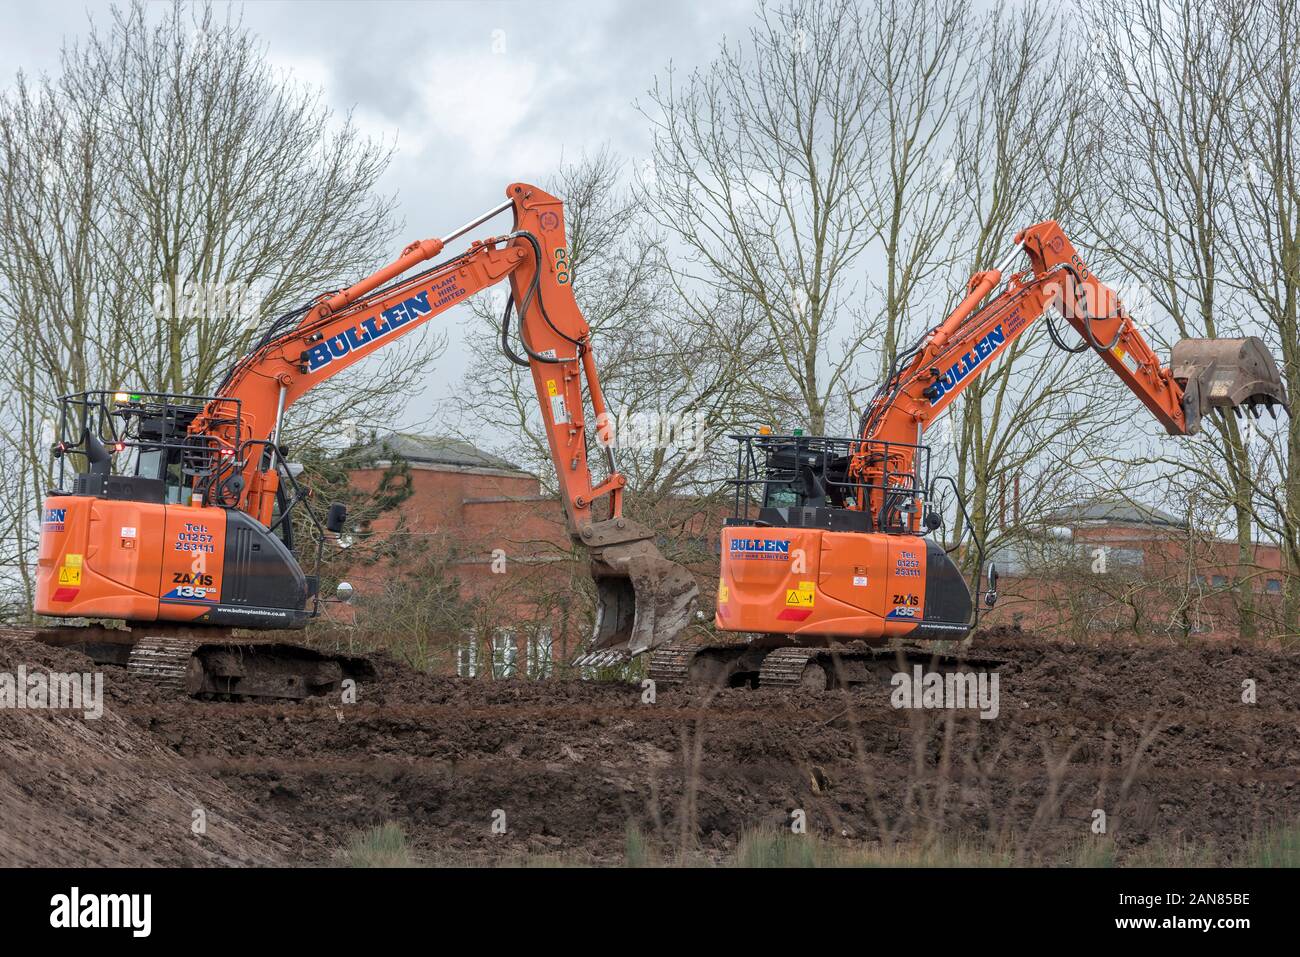 https://c8.alamy.com/comp/2AN85BE/looking-like-dinosaurs-two-diggers-at-work-on-building-site-company-name-bullens-2AN85BE.jpg